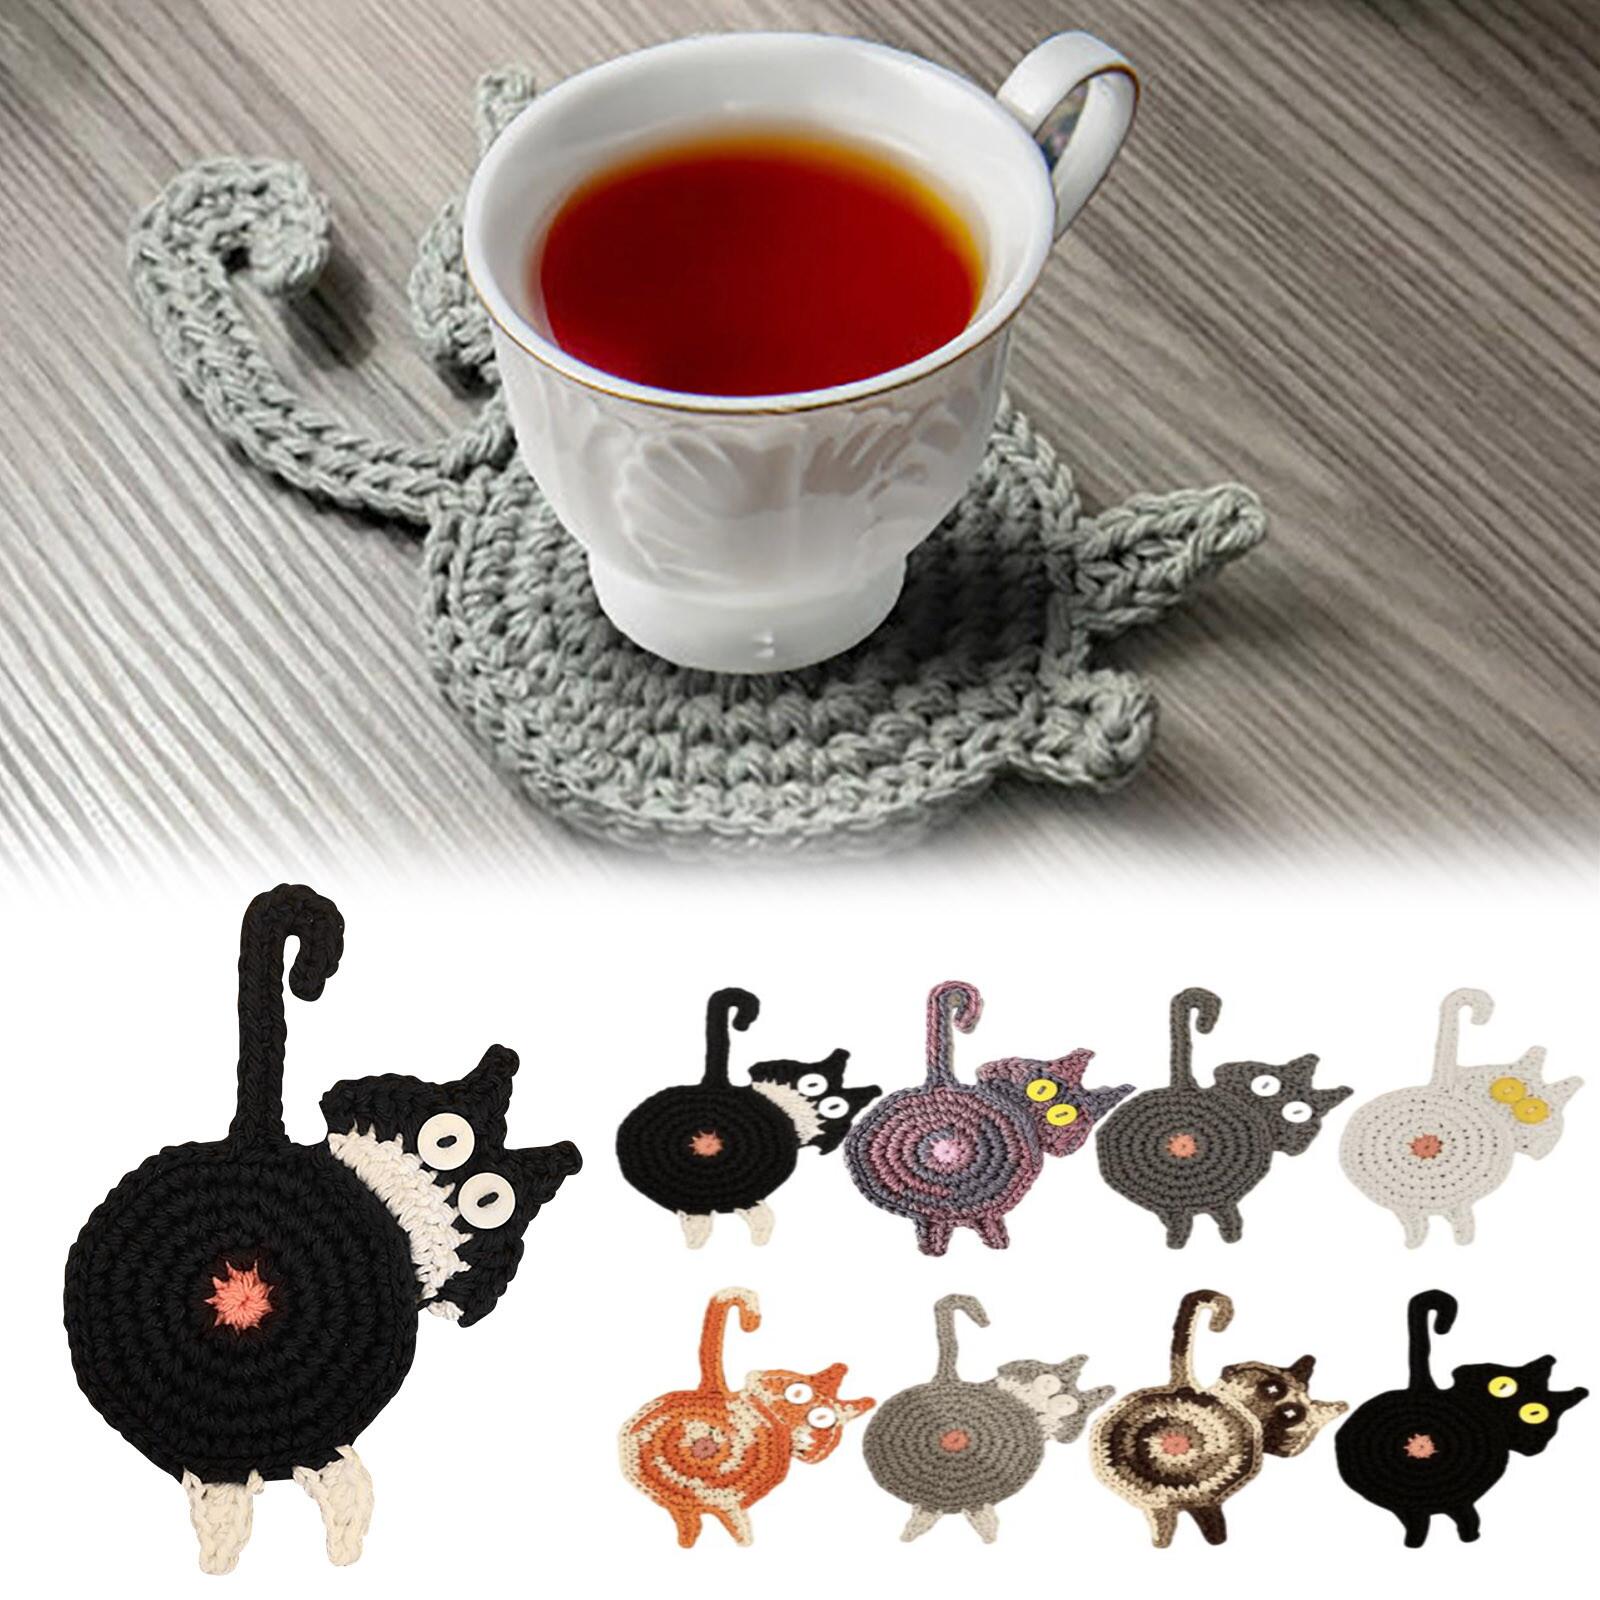 4 Pack Funny Cat Coaster for Drinks Absorbent, Cat Shaped Ceramic Drink  Coaster with Cork Base, Heat Resistant Coaster for Tabletop Protection,  Unique